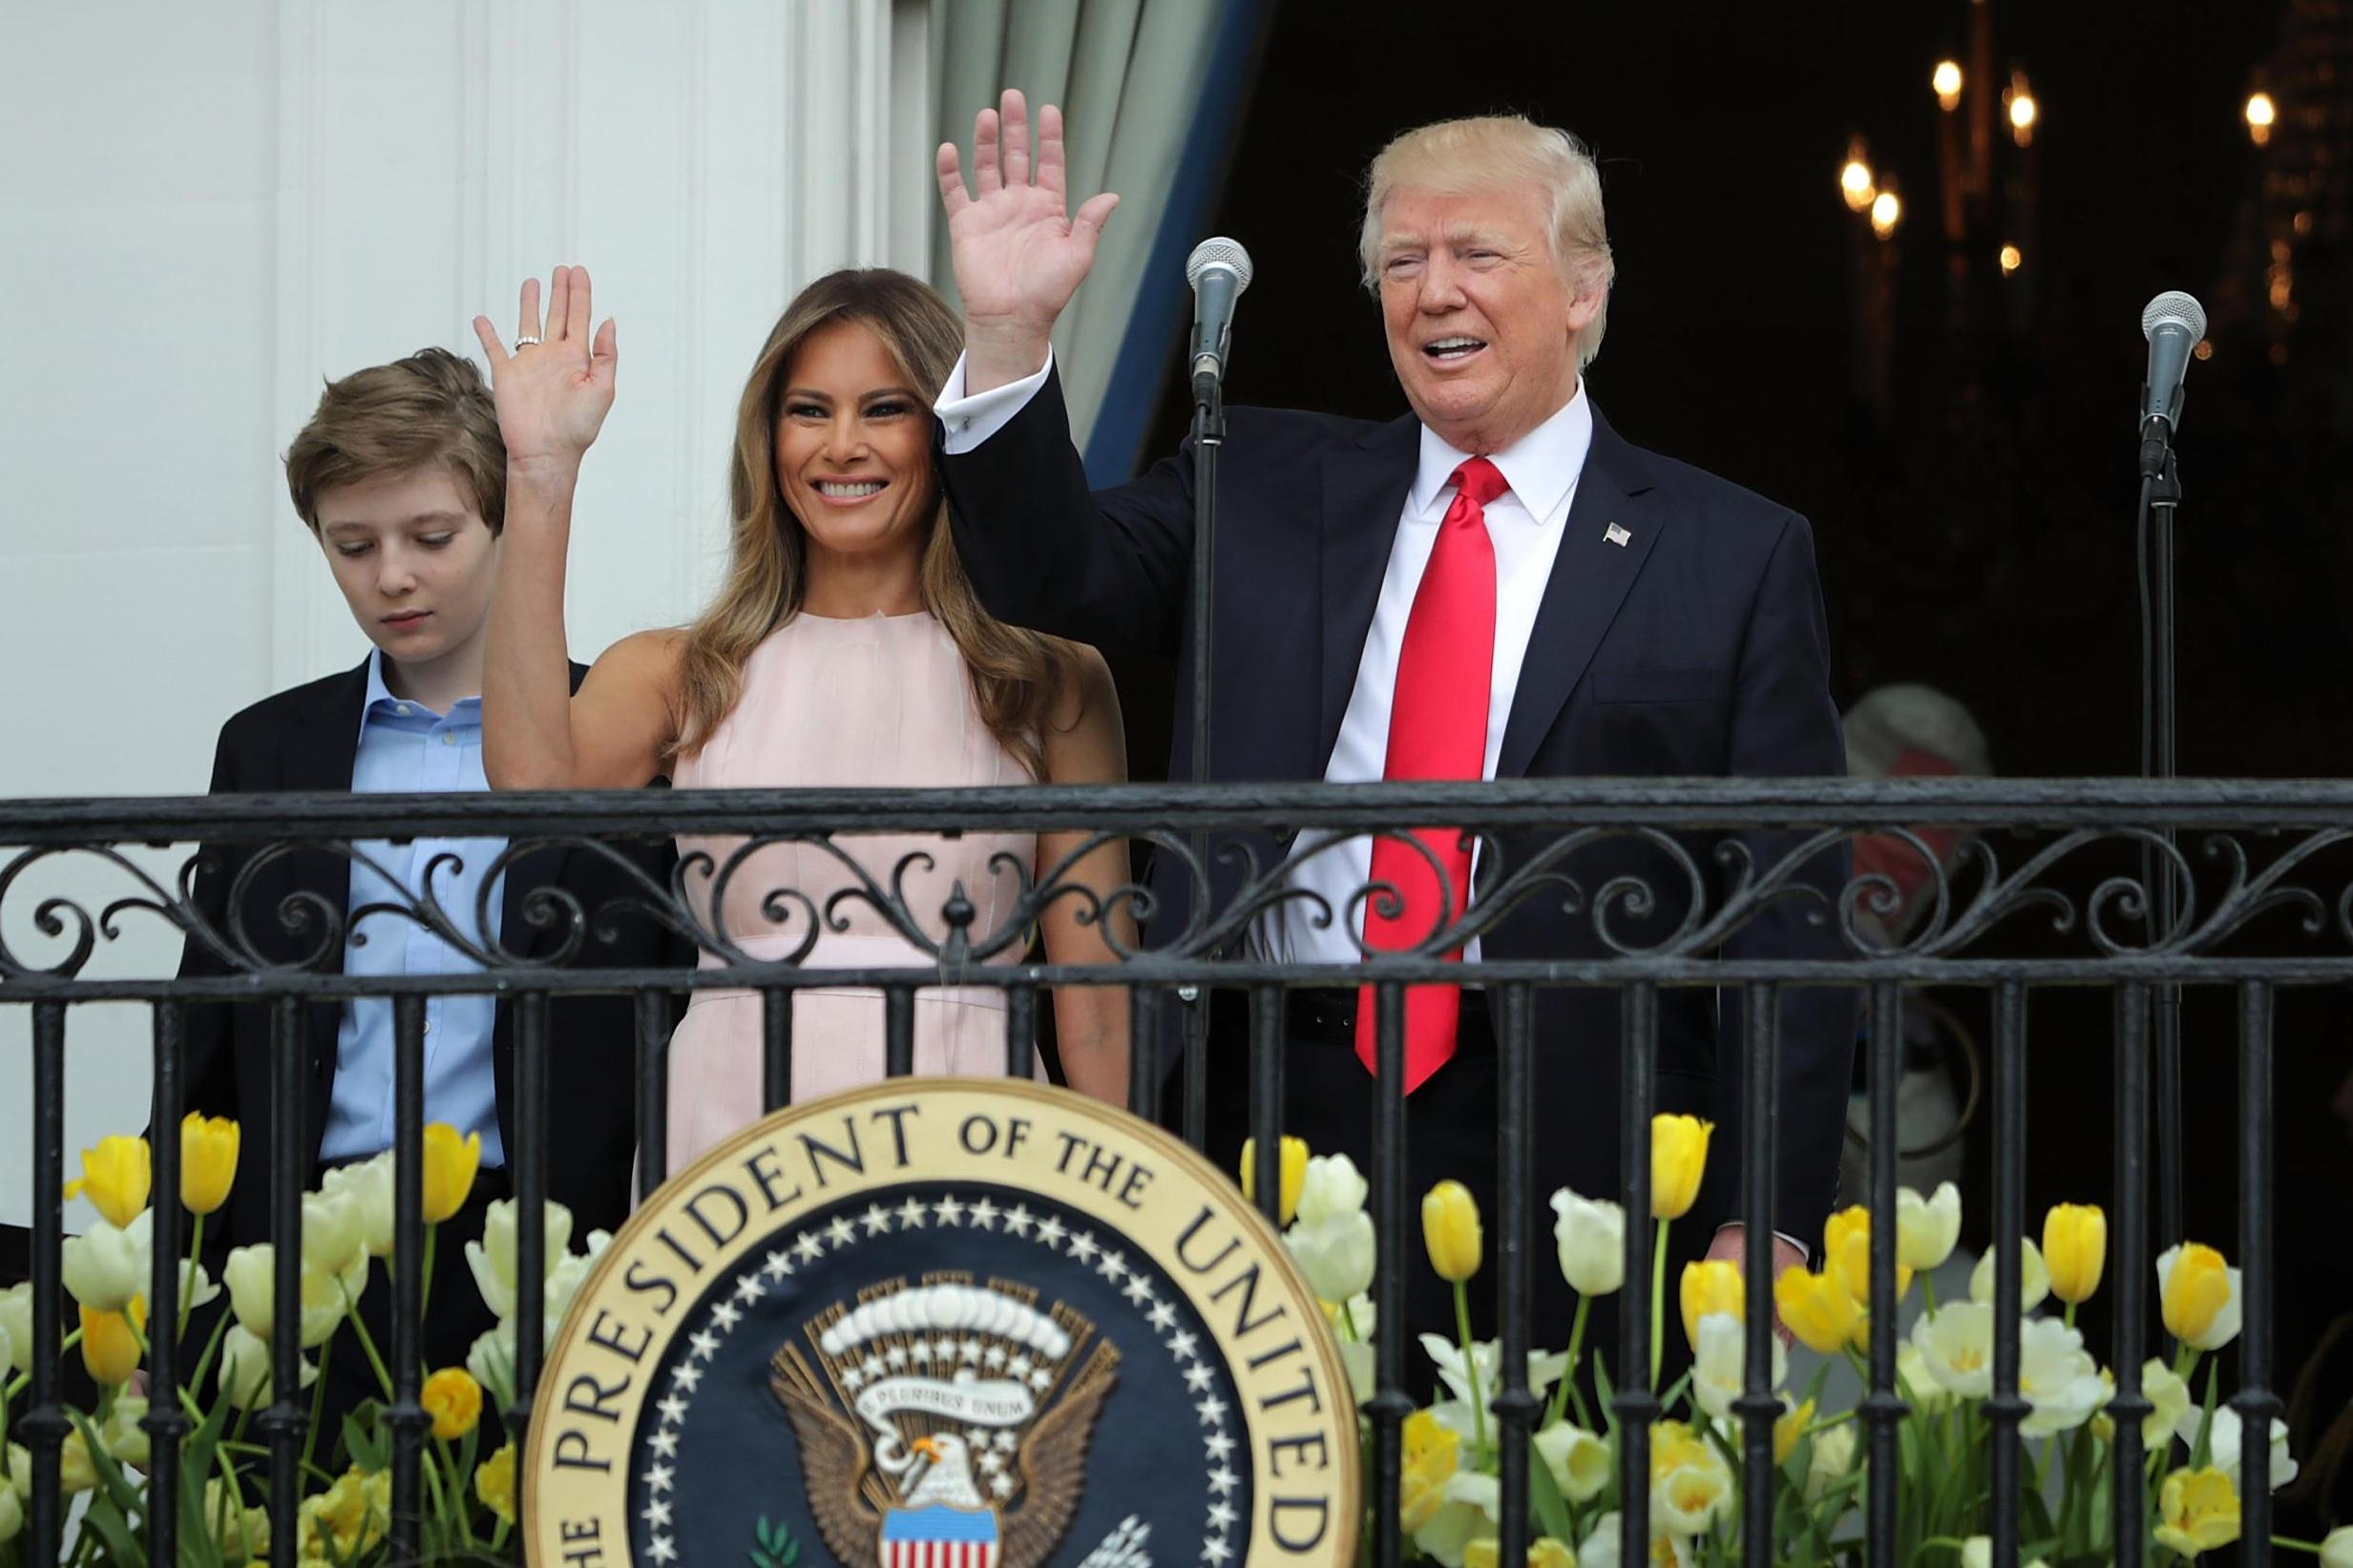 Picture: President Donald Trump and first lady Melania Trump wave to guests from the Truman Balcony with their son Barron Trump during the 139th Easter Egg Roll on the South Lawn of the White House April 17, 2017 in Washington, DC